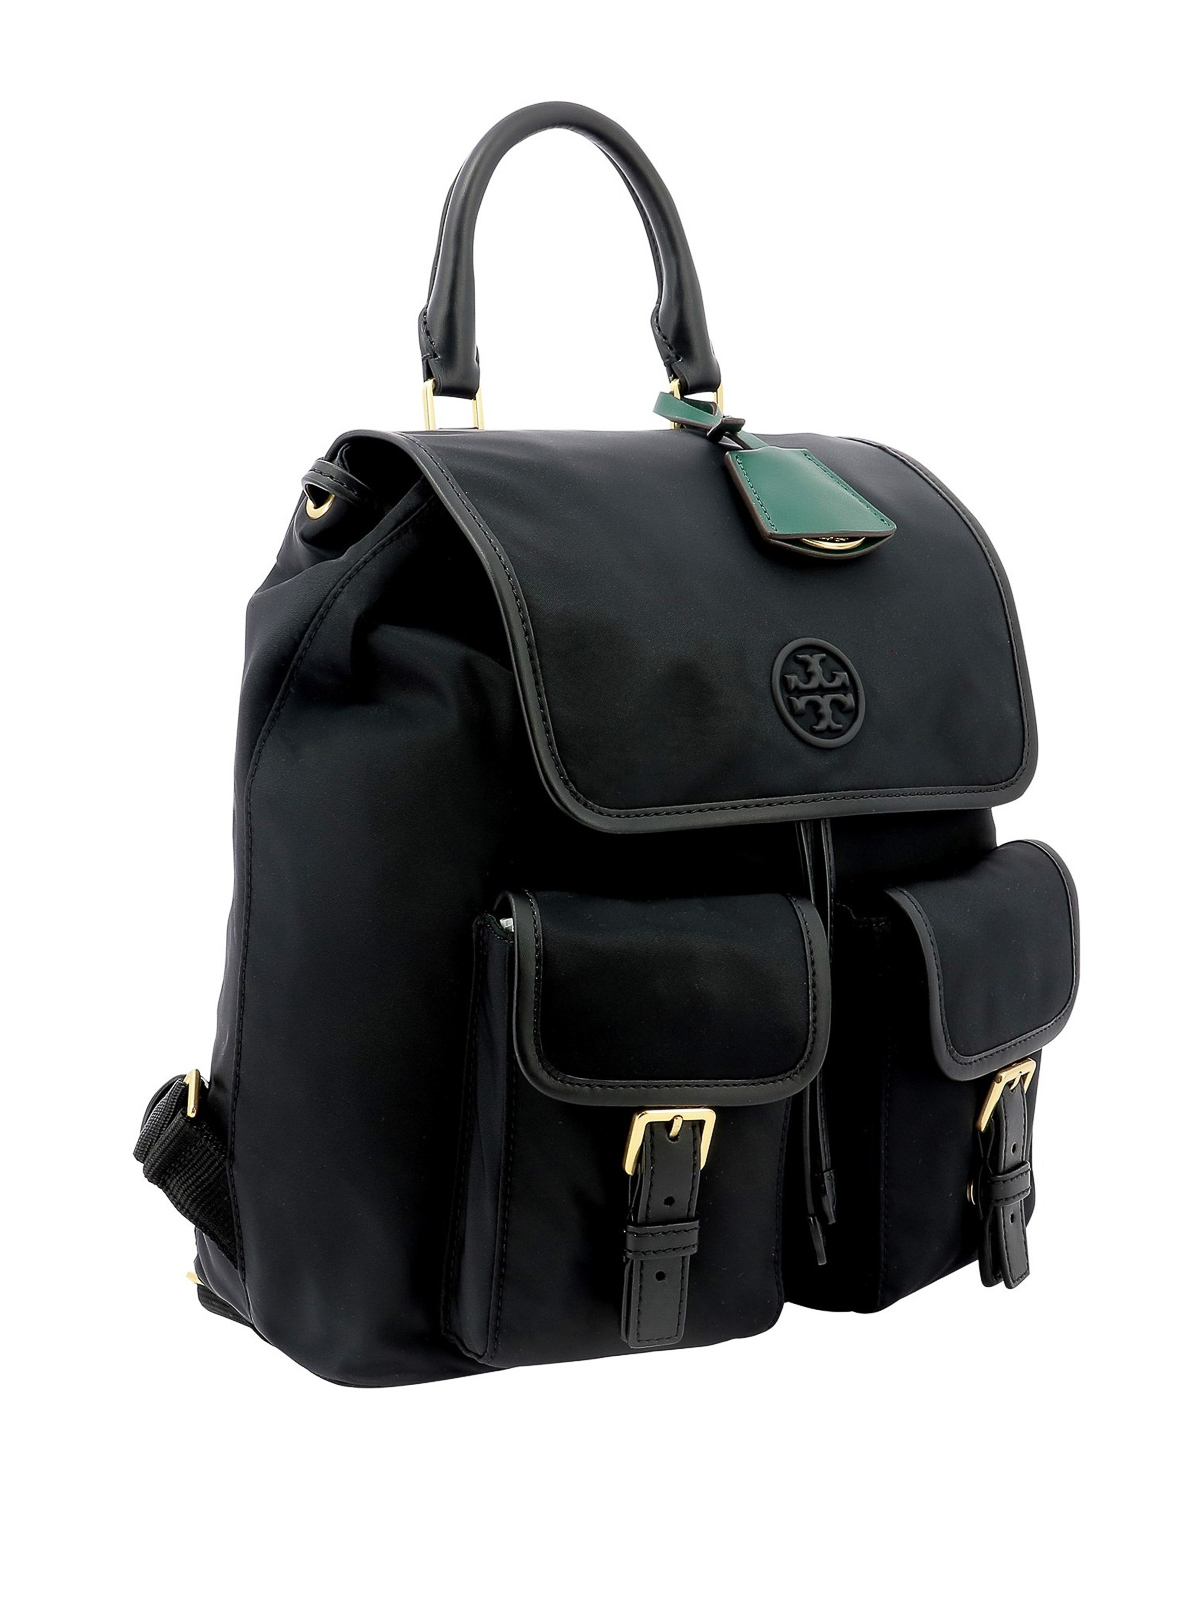 period Candy velvet Backpacks Tory Burch - Perry backpack - 74462001 | thebs.com [ikrix.com]